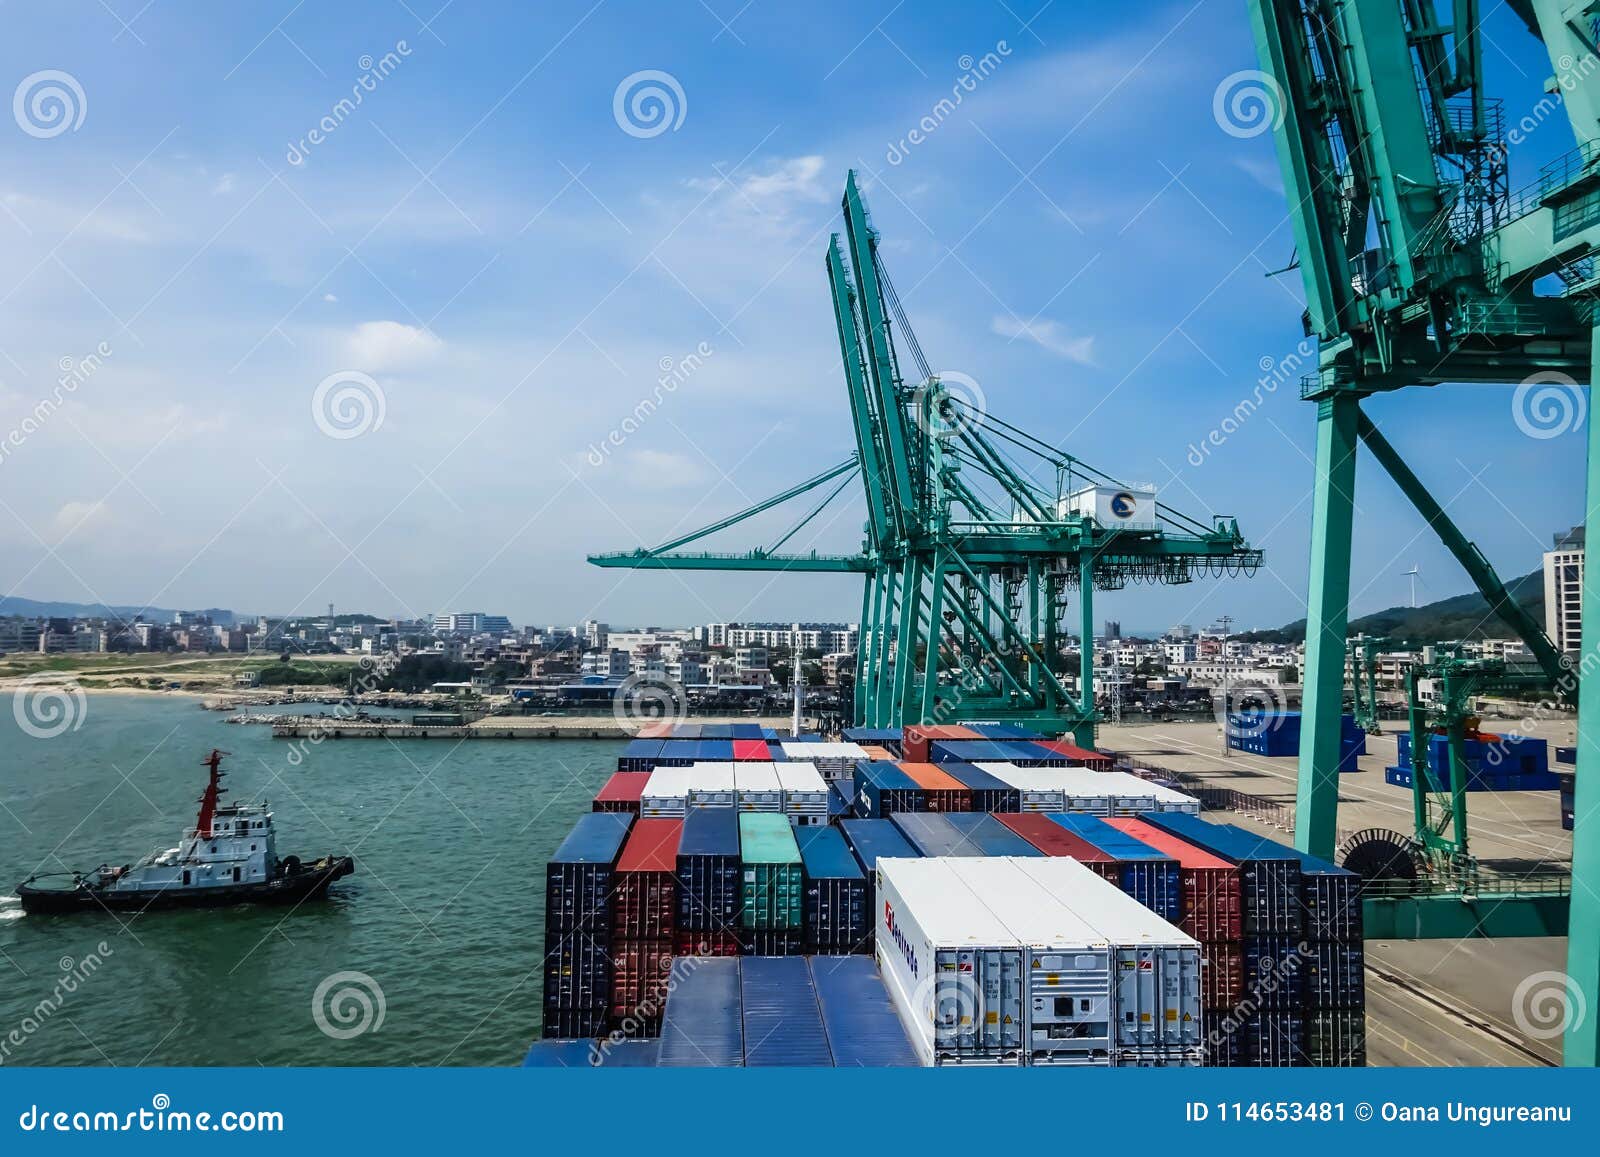 Container Vessel Alongside in the Port of Shantou, China Editorial Photo -  Image of tugboat, crew: 114653481